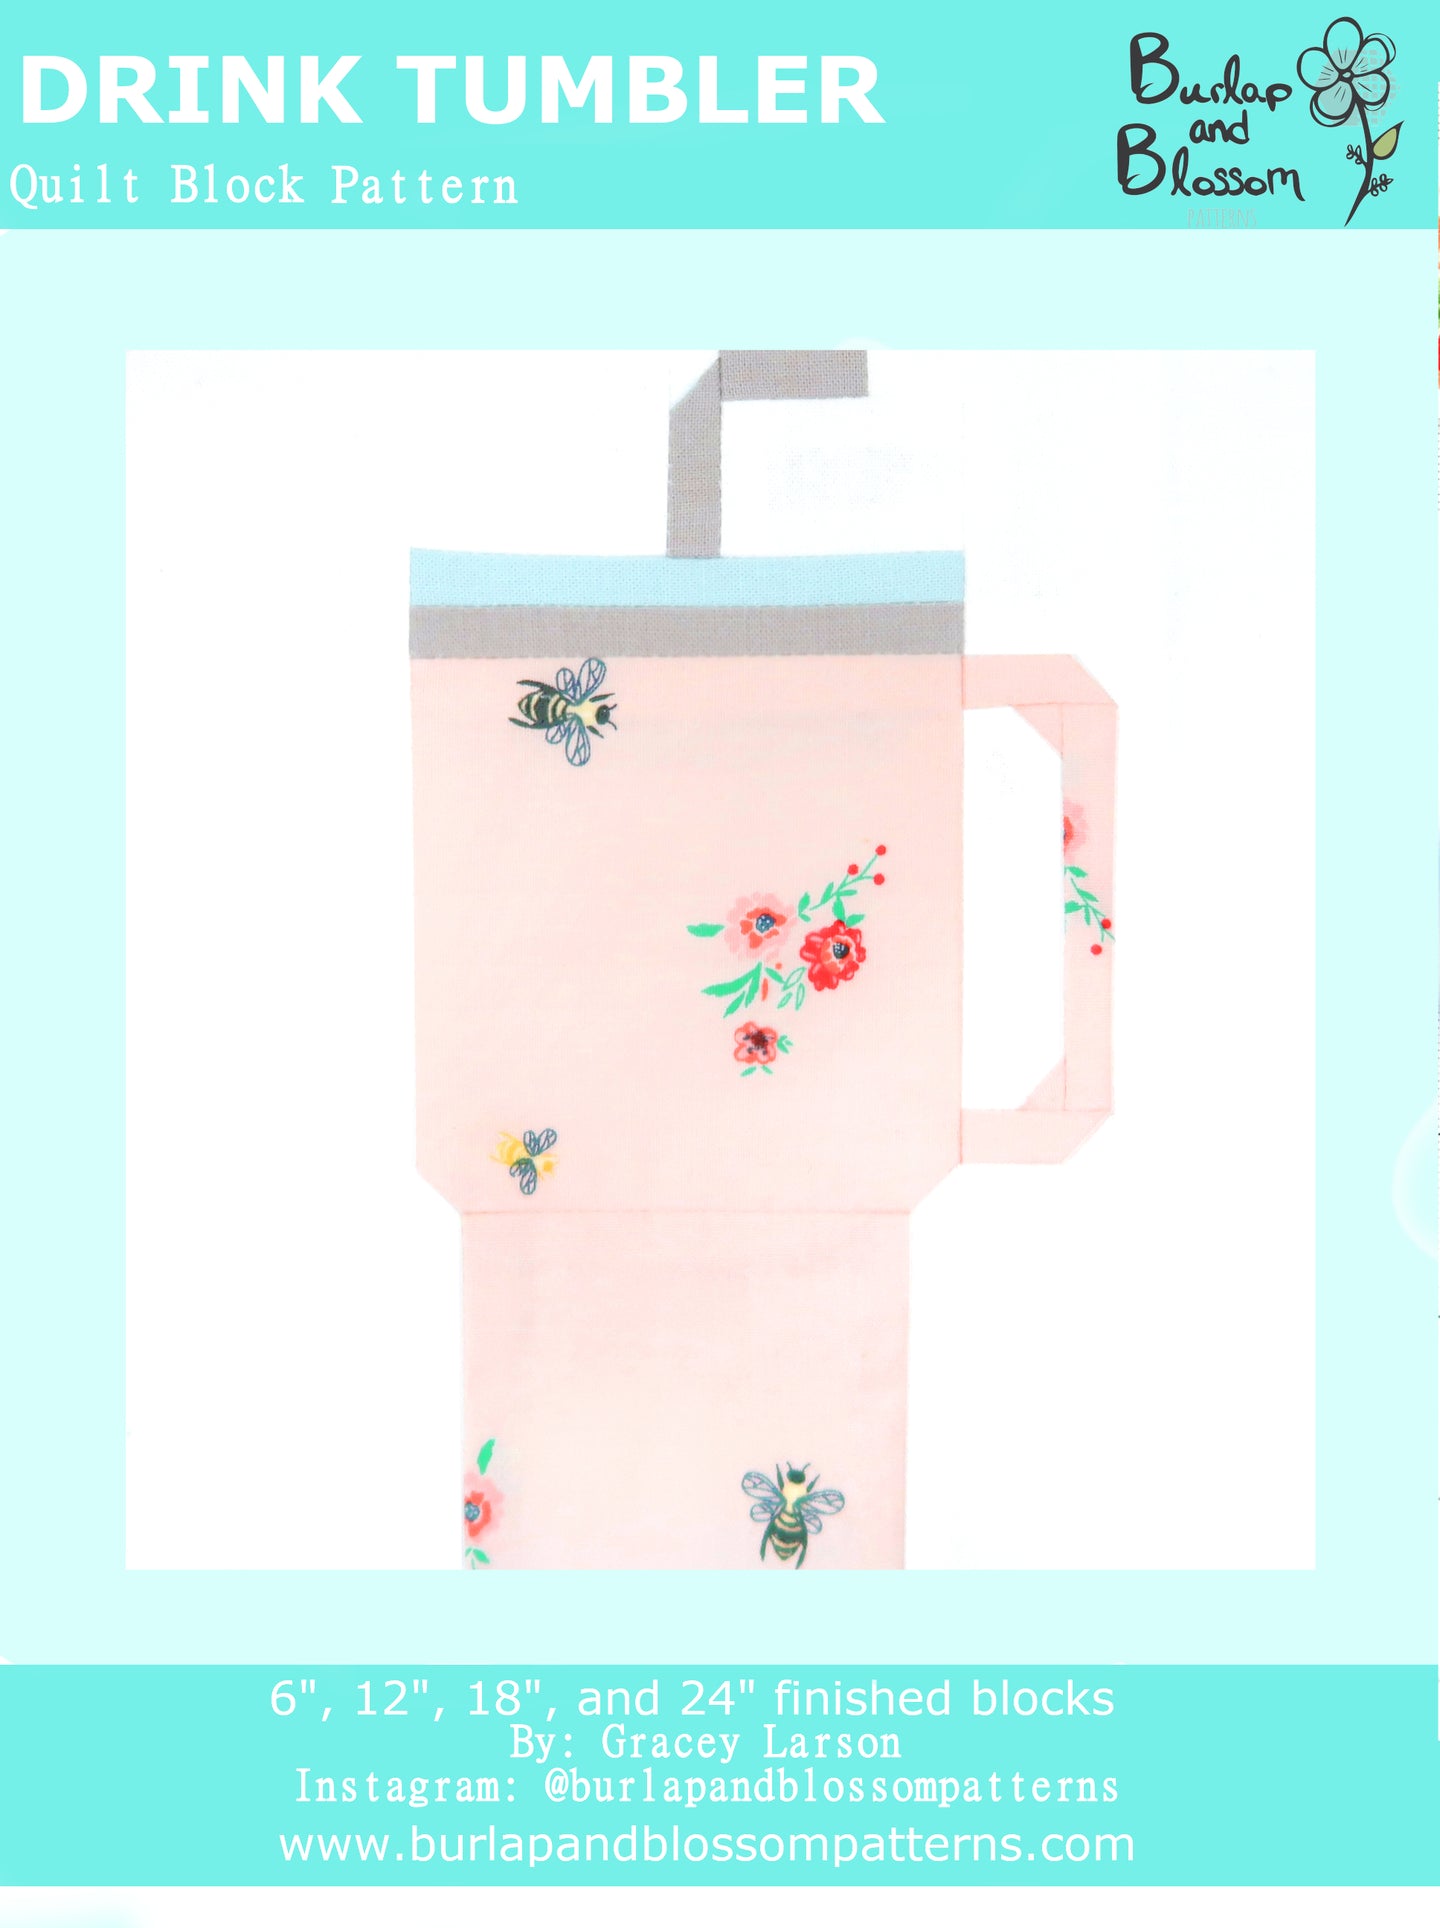 Pattern, Drink Tumbler Block by Burlap and Blossom (digital download)